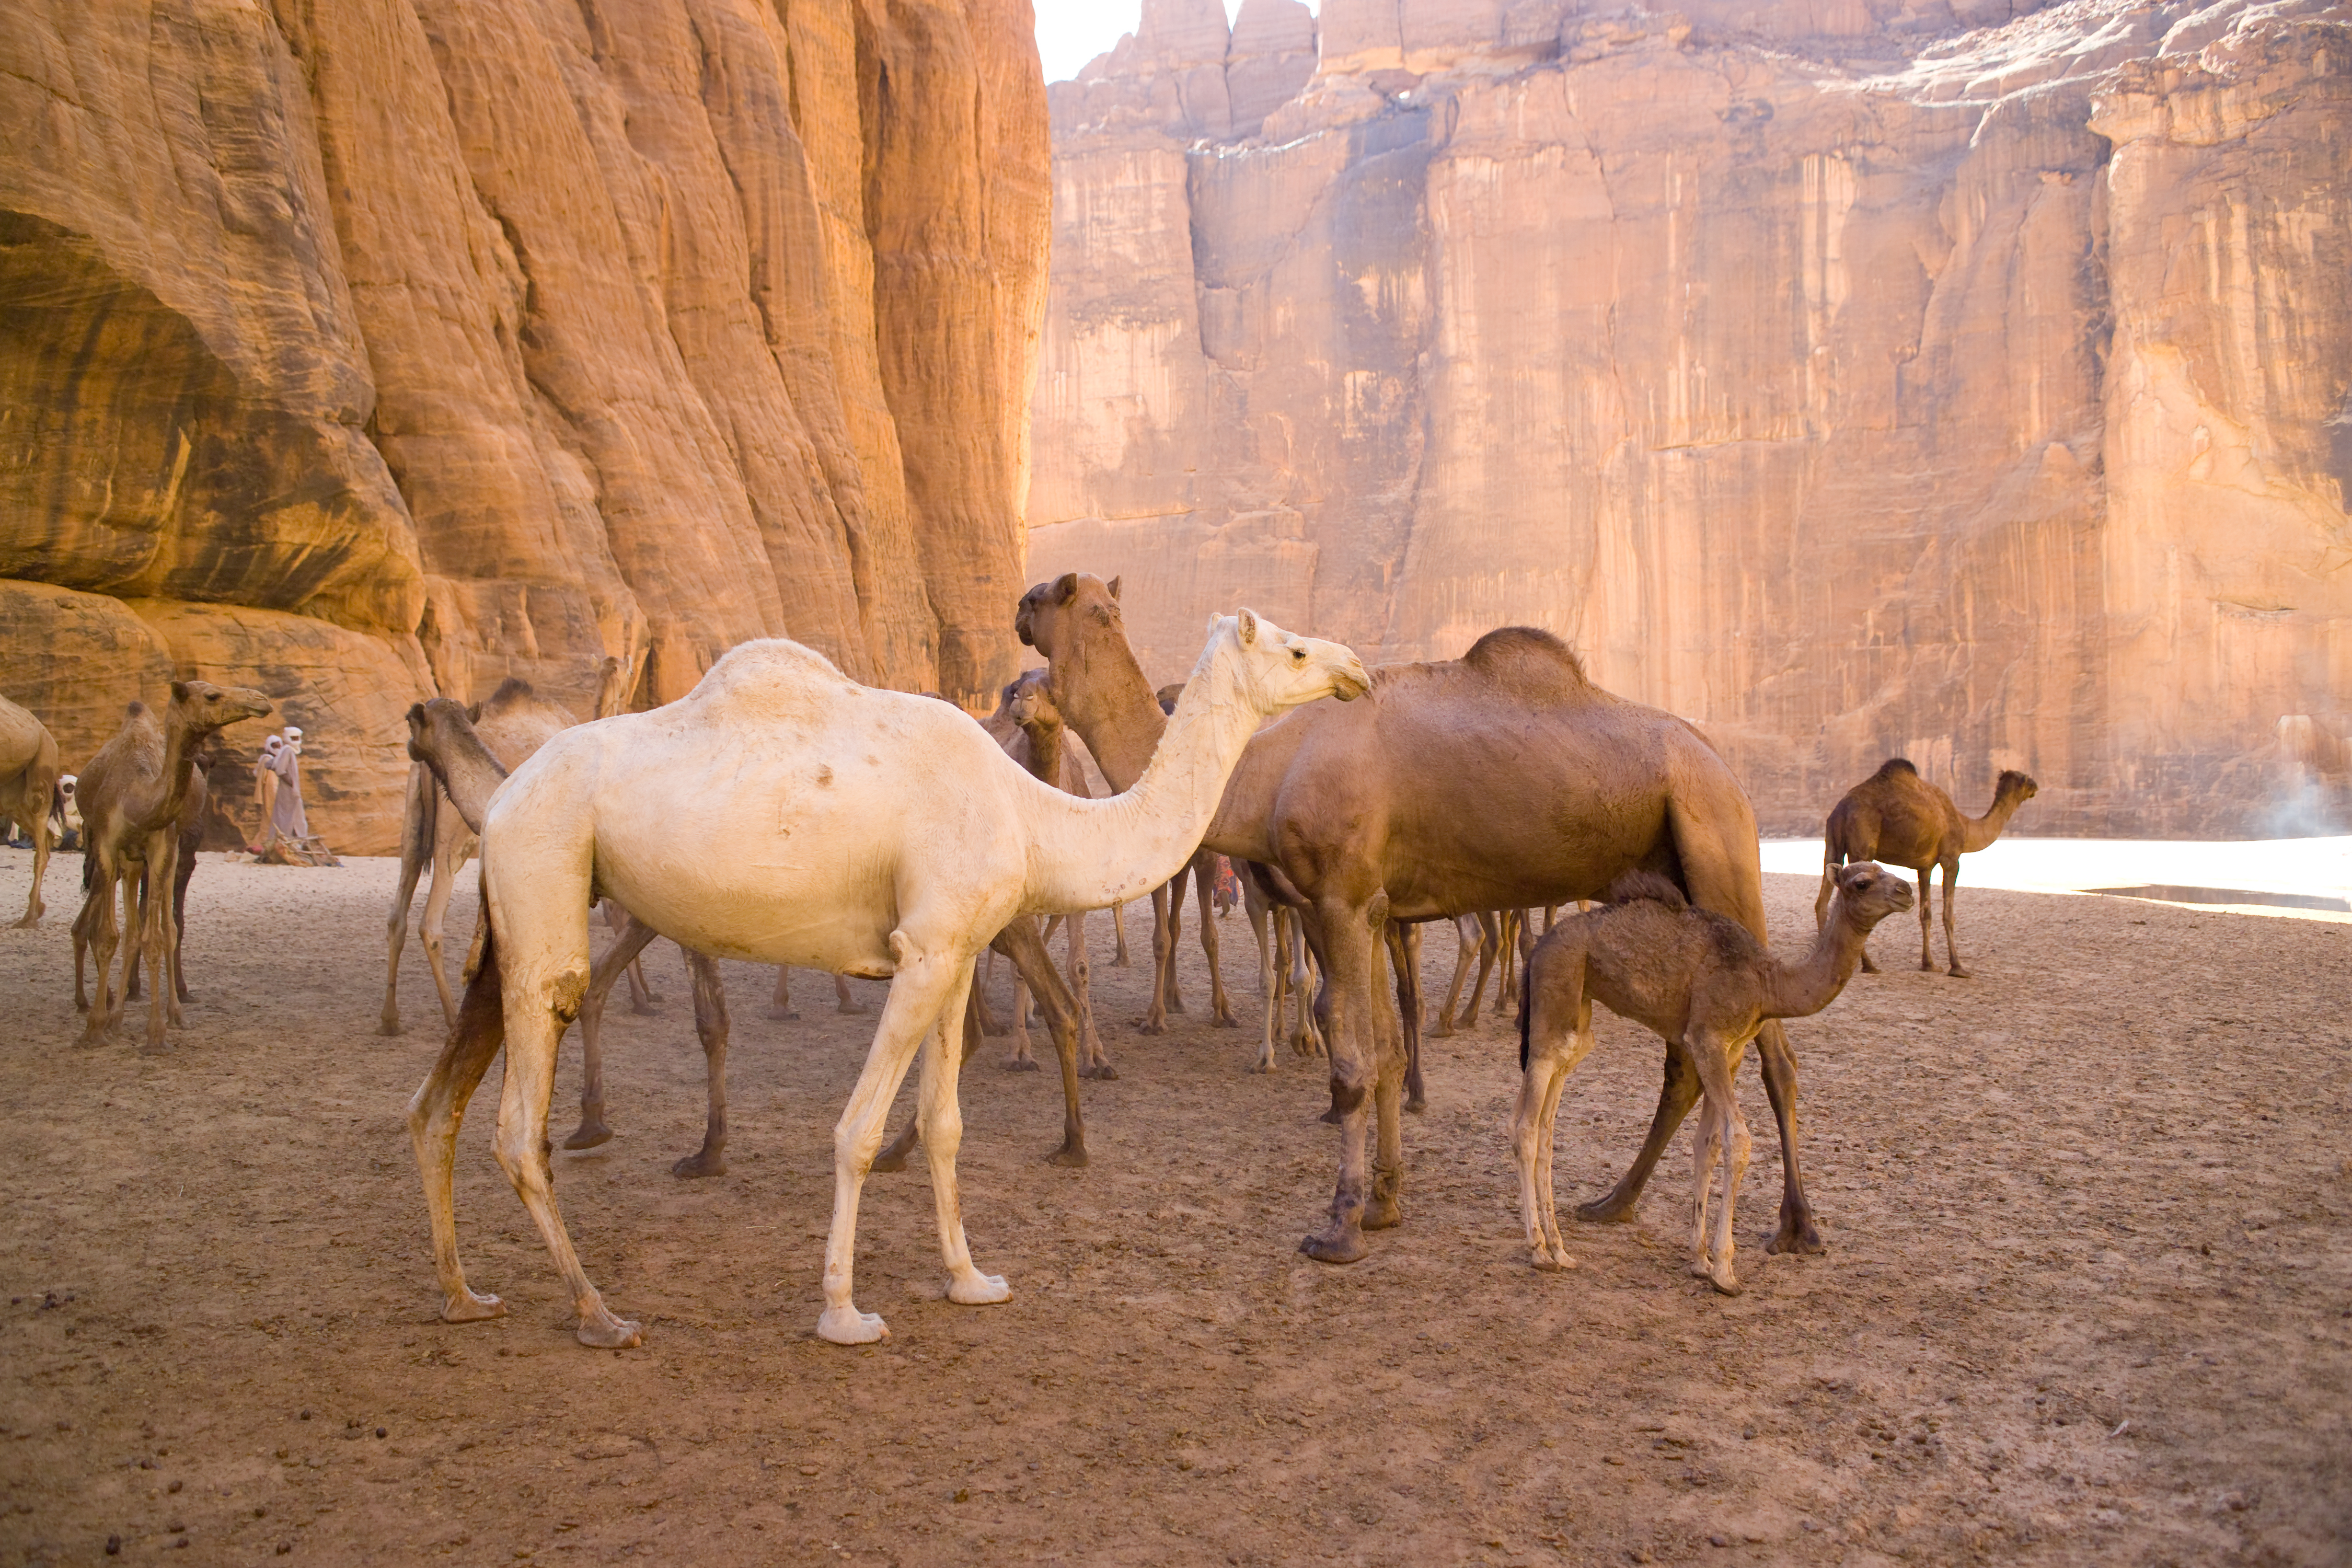 Camels in the mountain deserts of Chad